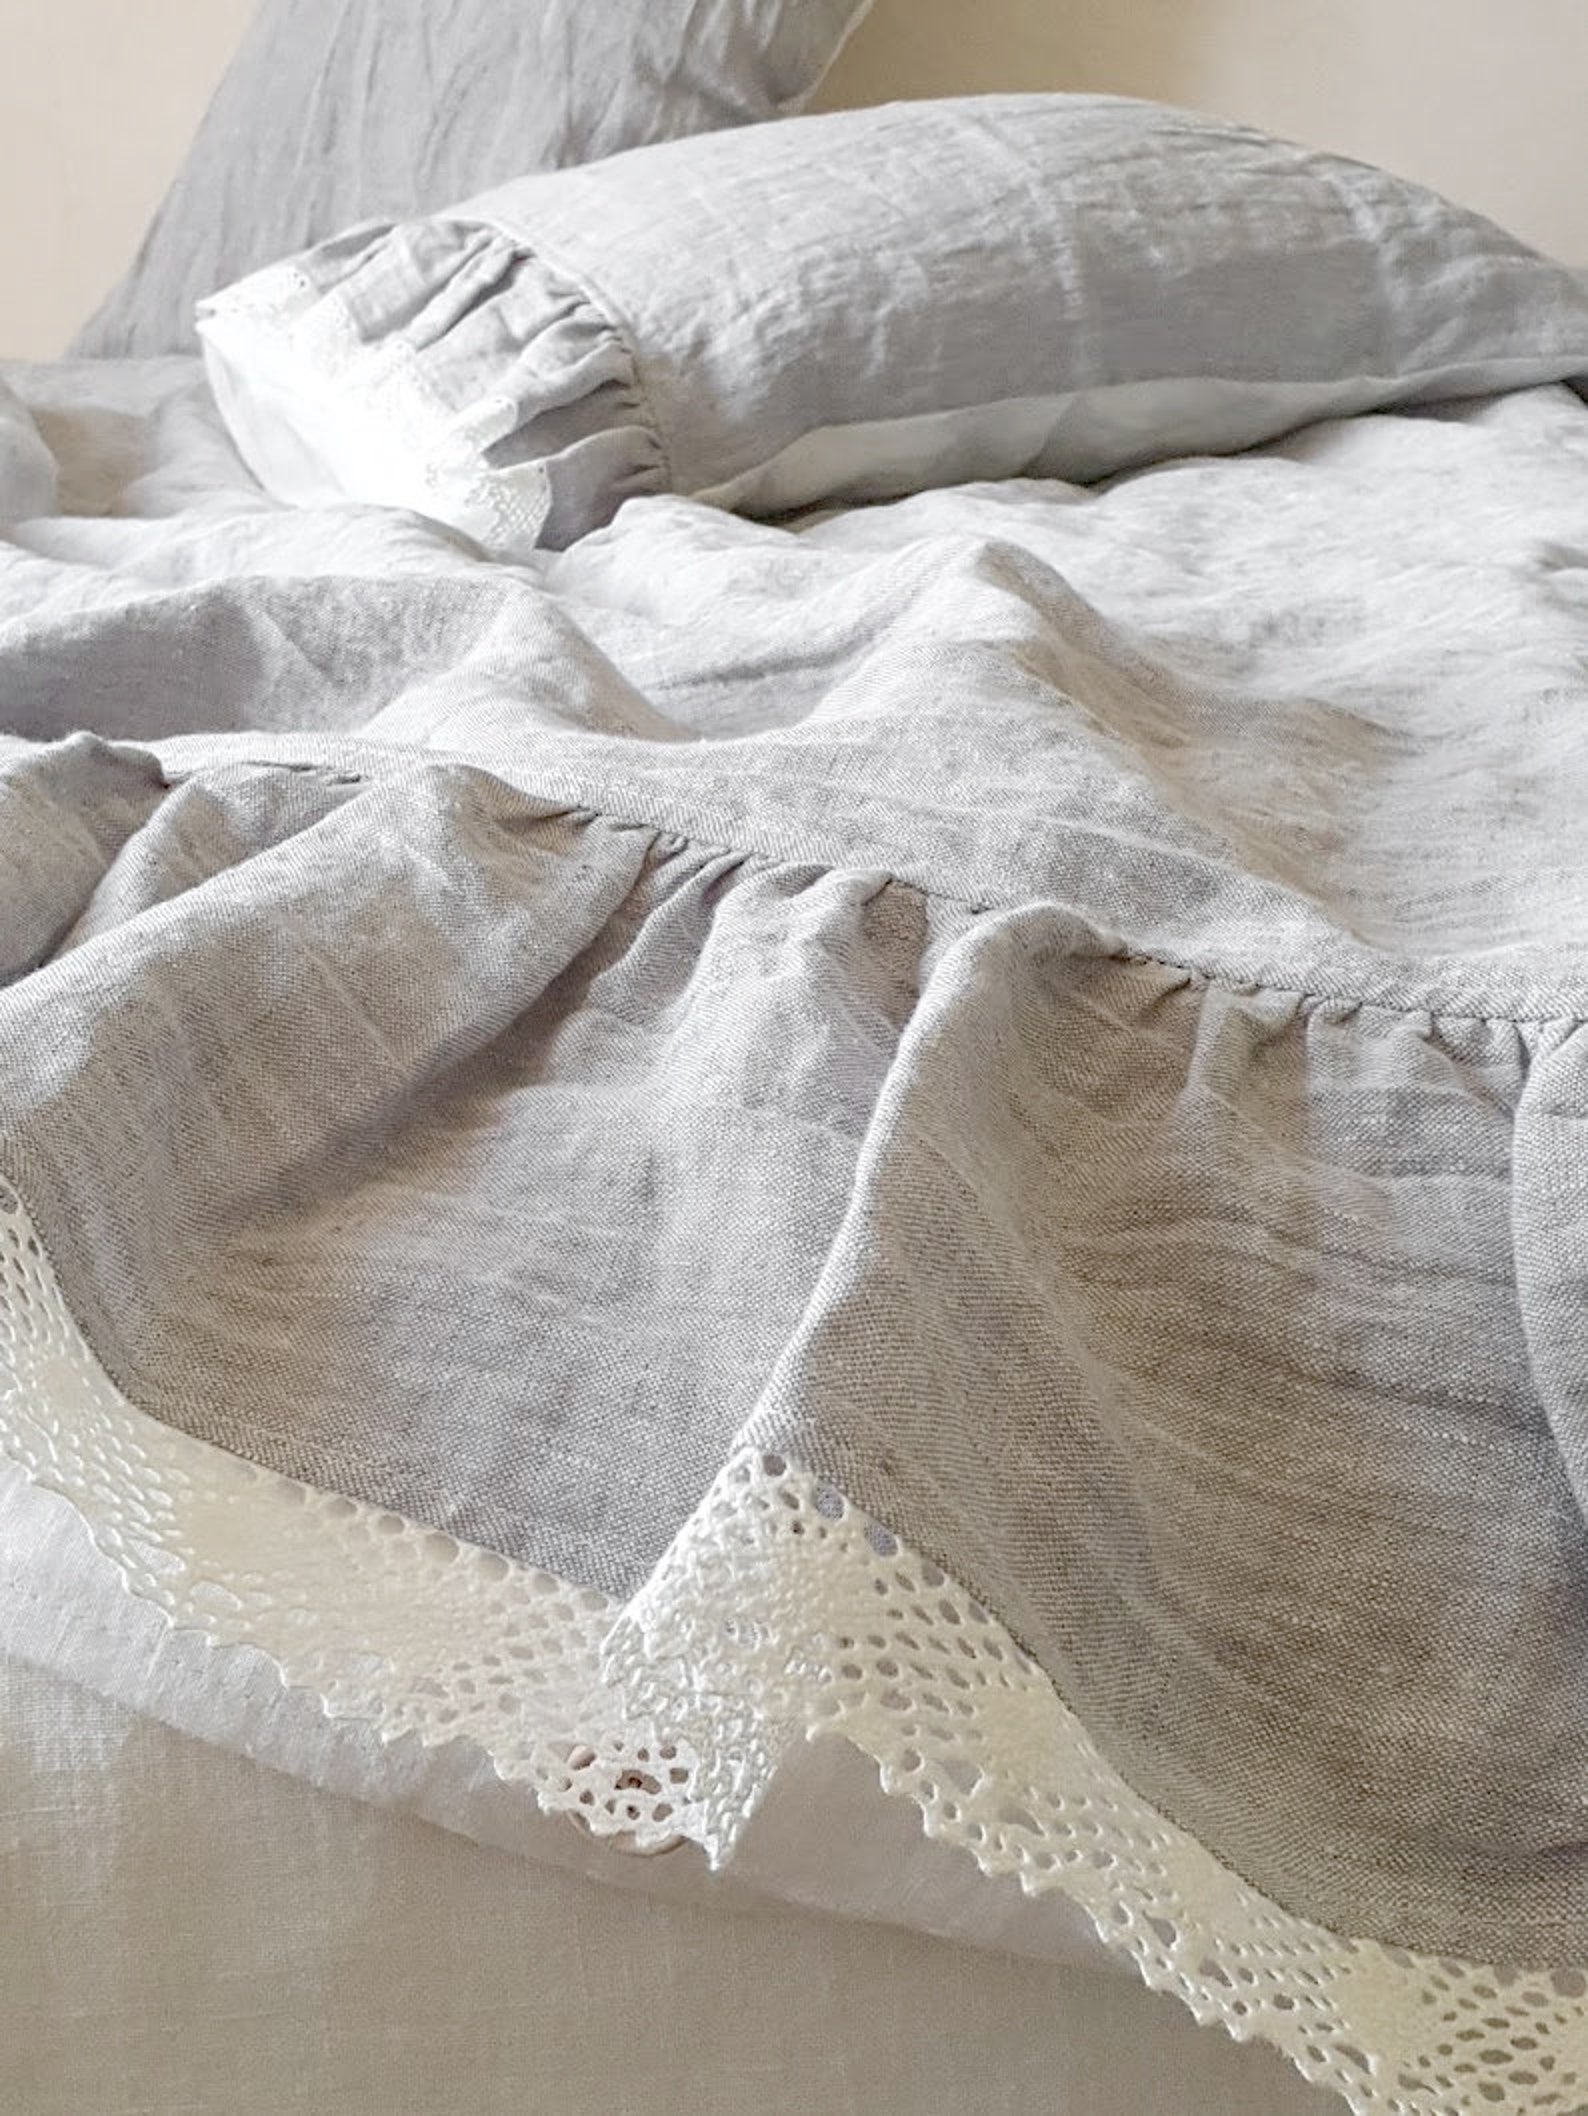 BEDDING SET With Ruffled Lace at the Bottom in Melange Grey - Etsy